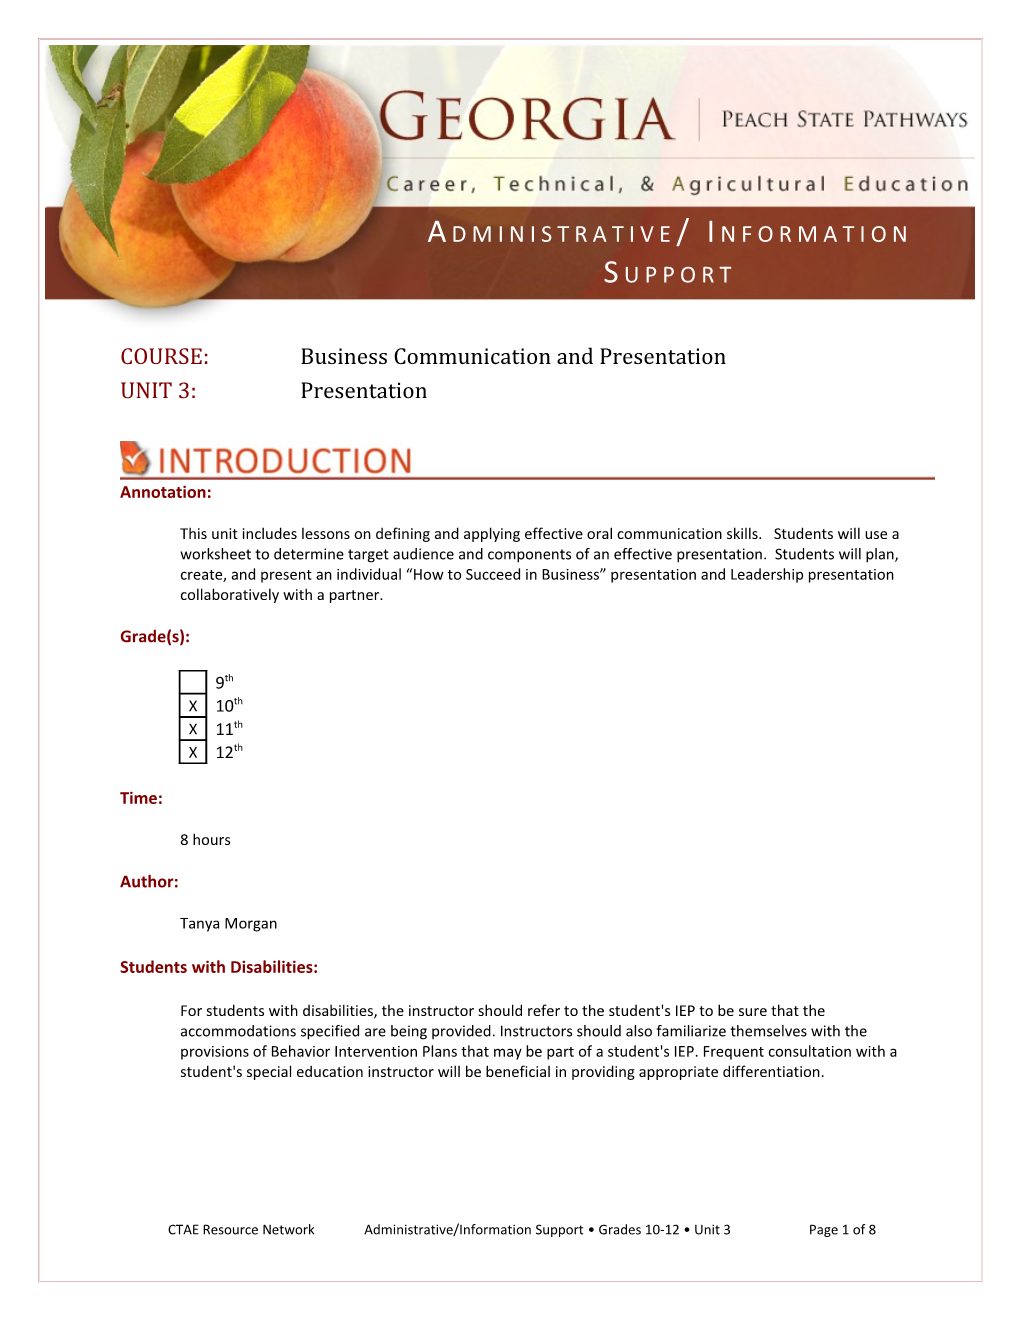 COURSE: Business Communication and Presentation